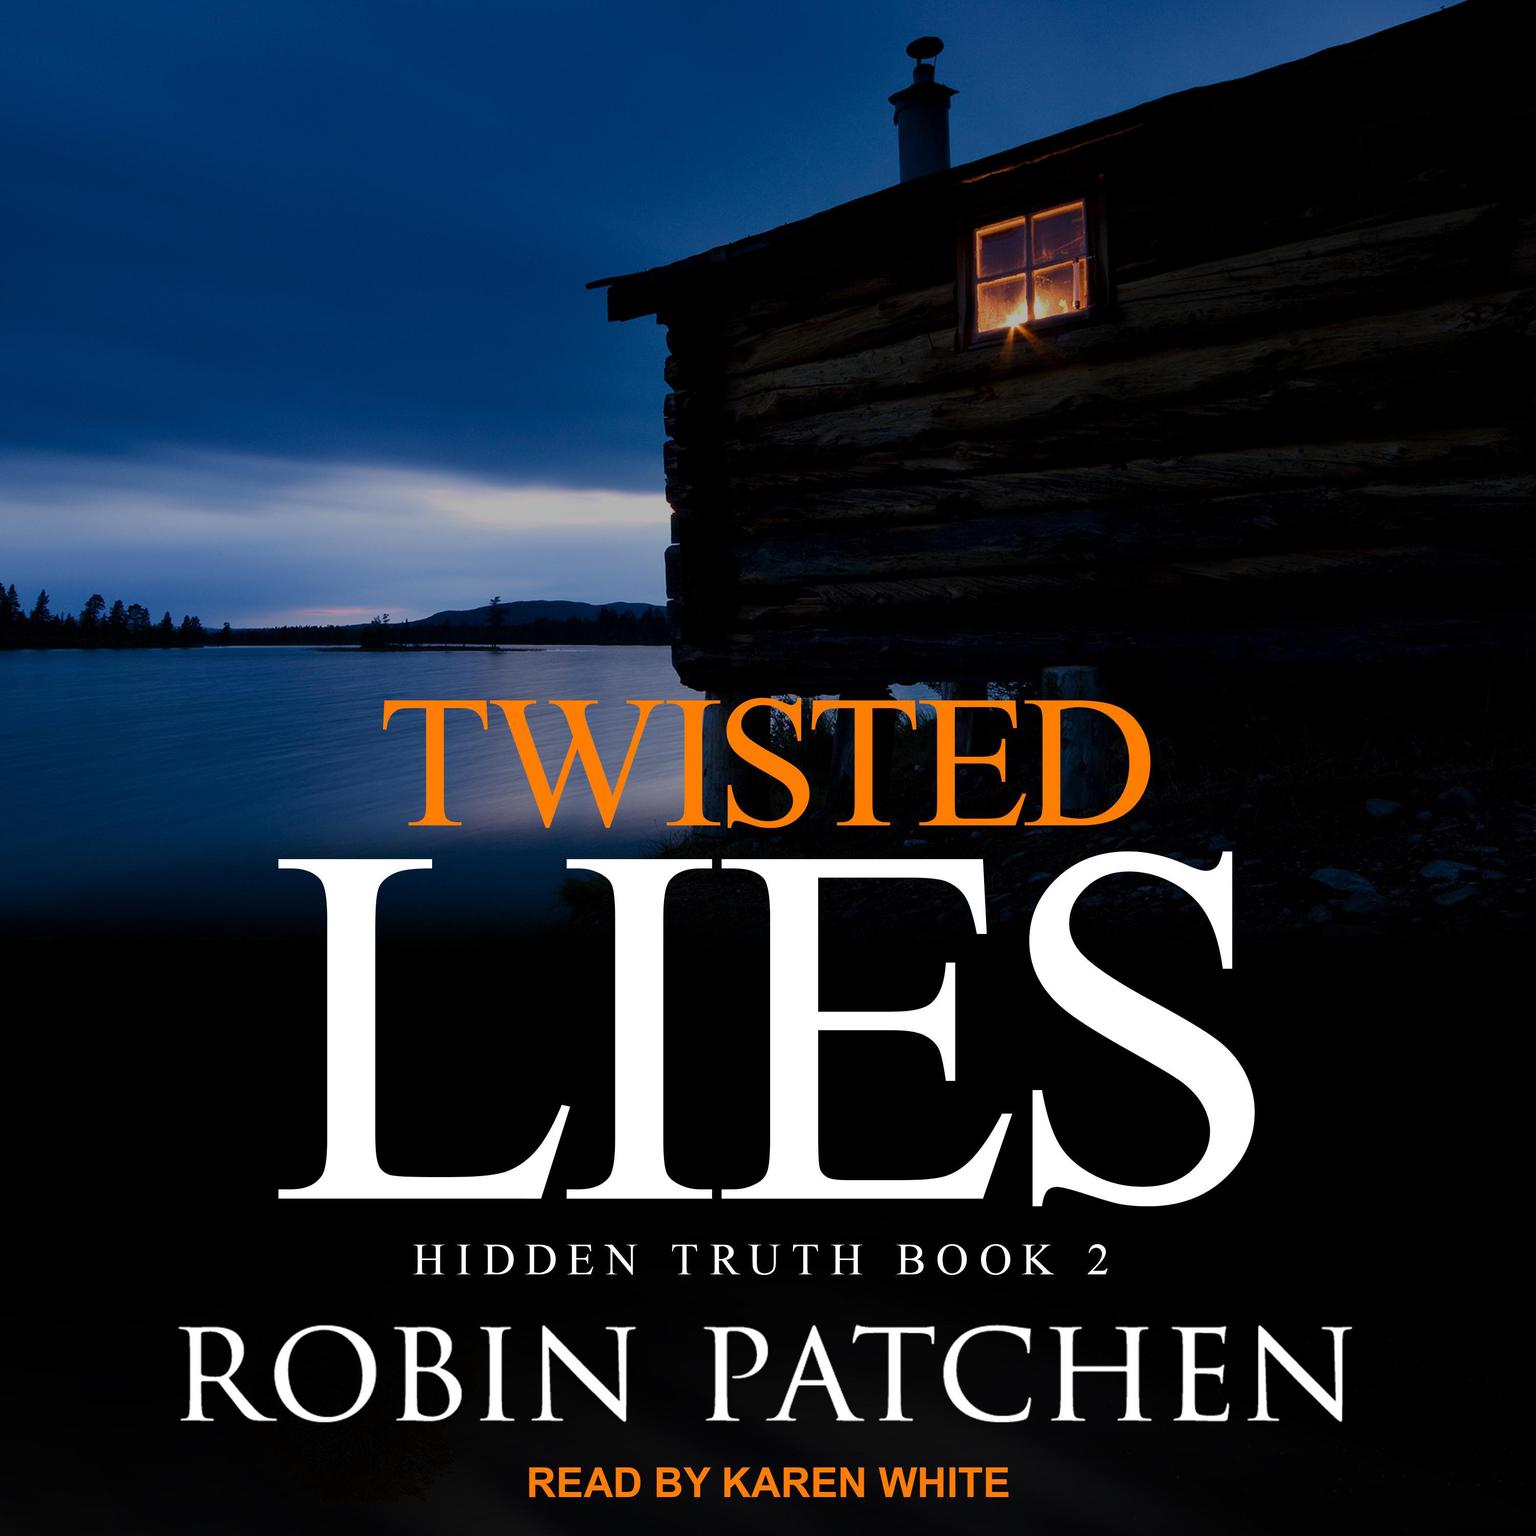 Twisted Lies Audiobook, by Robin Patchen